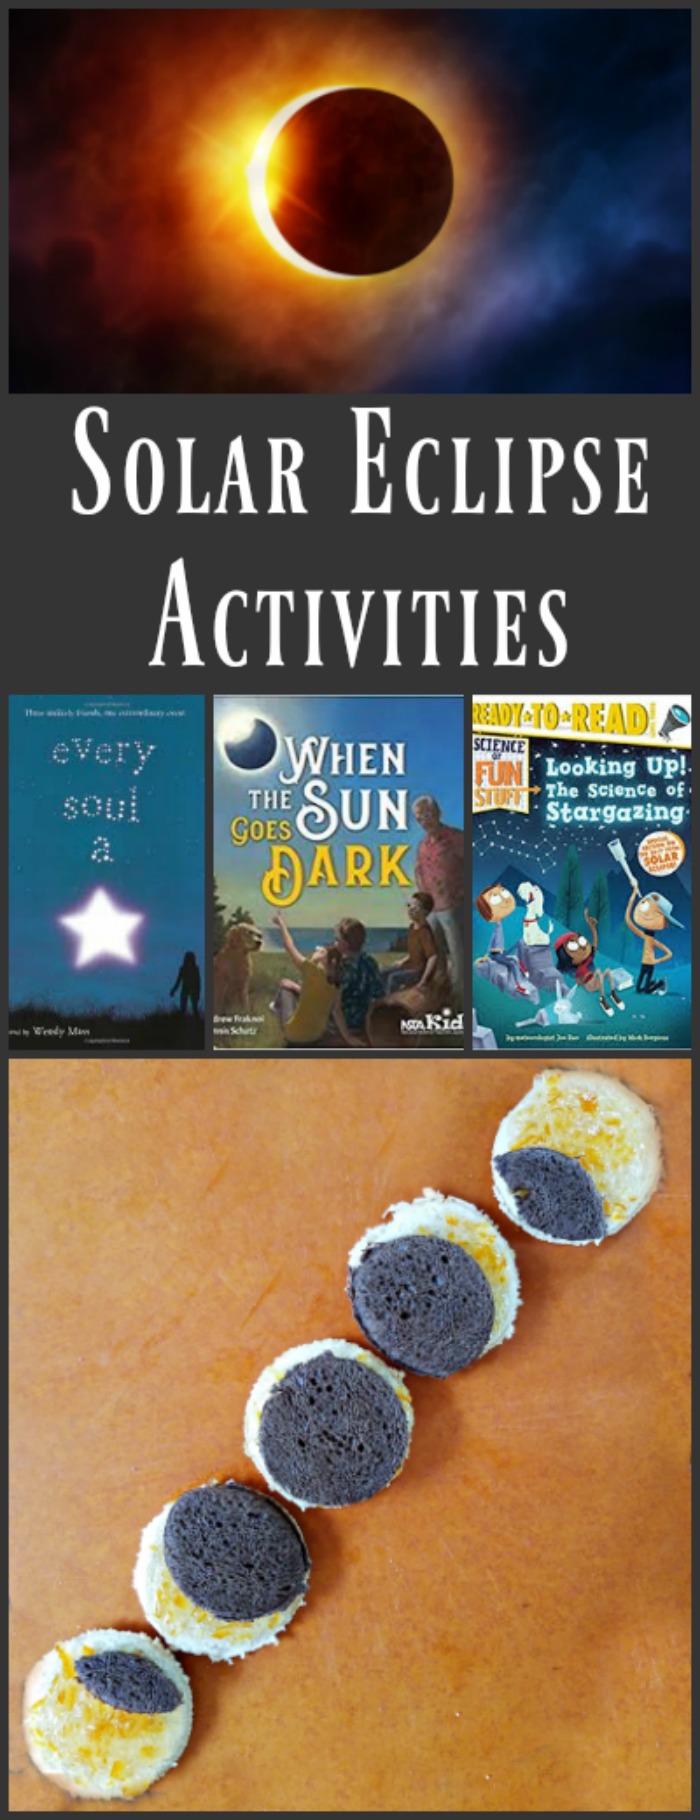 Solar eclipse activities: party food ideas, science activities and viewing tips!